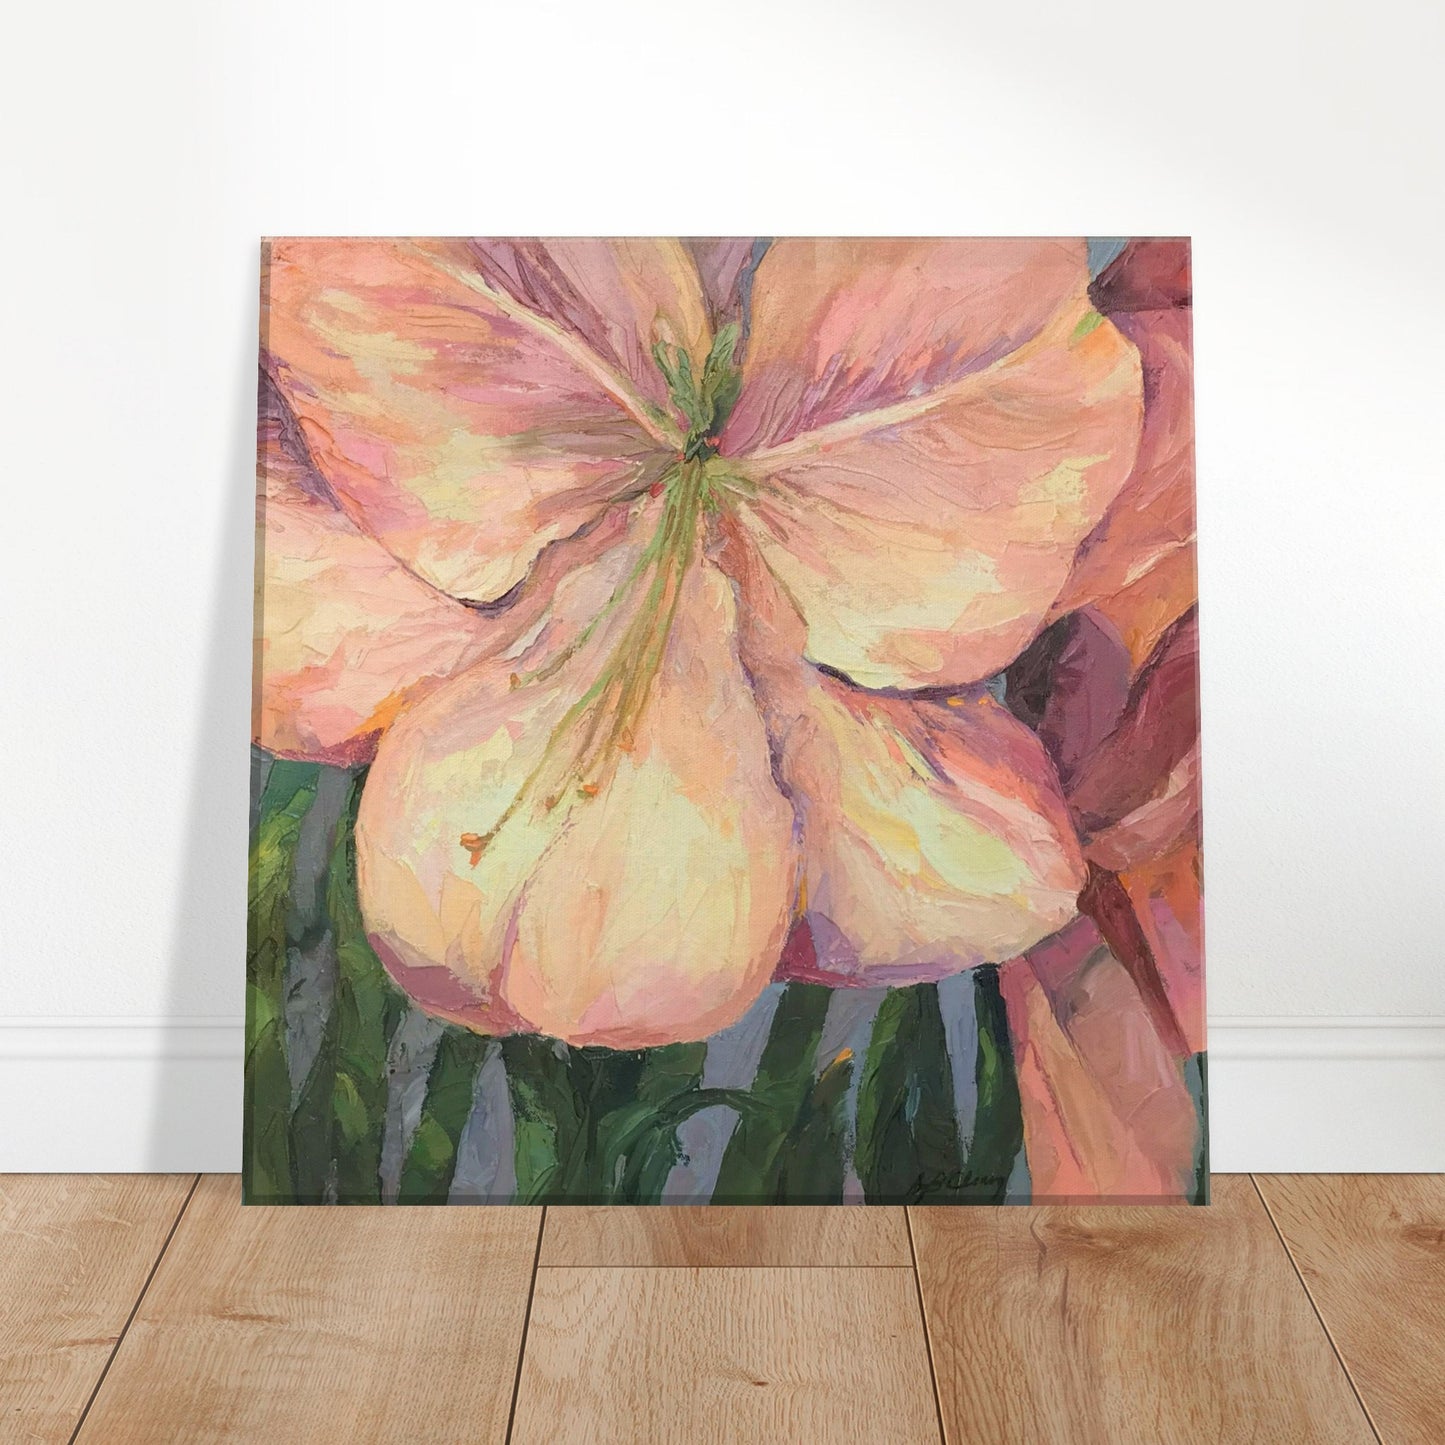 "Amaryllis" Floral Print 12x12 inch on Canvas by Barbara Cleary Designs